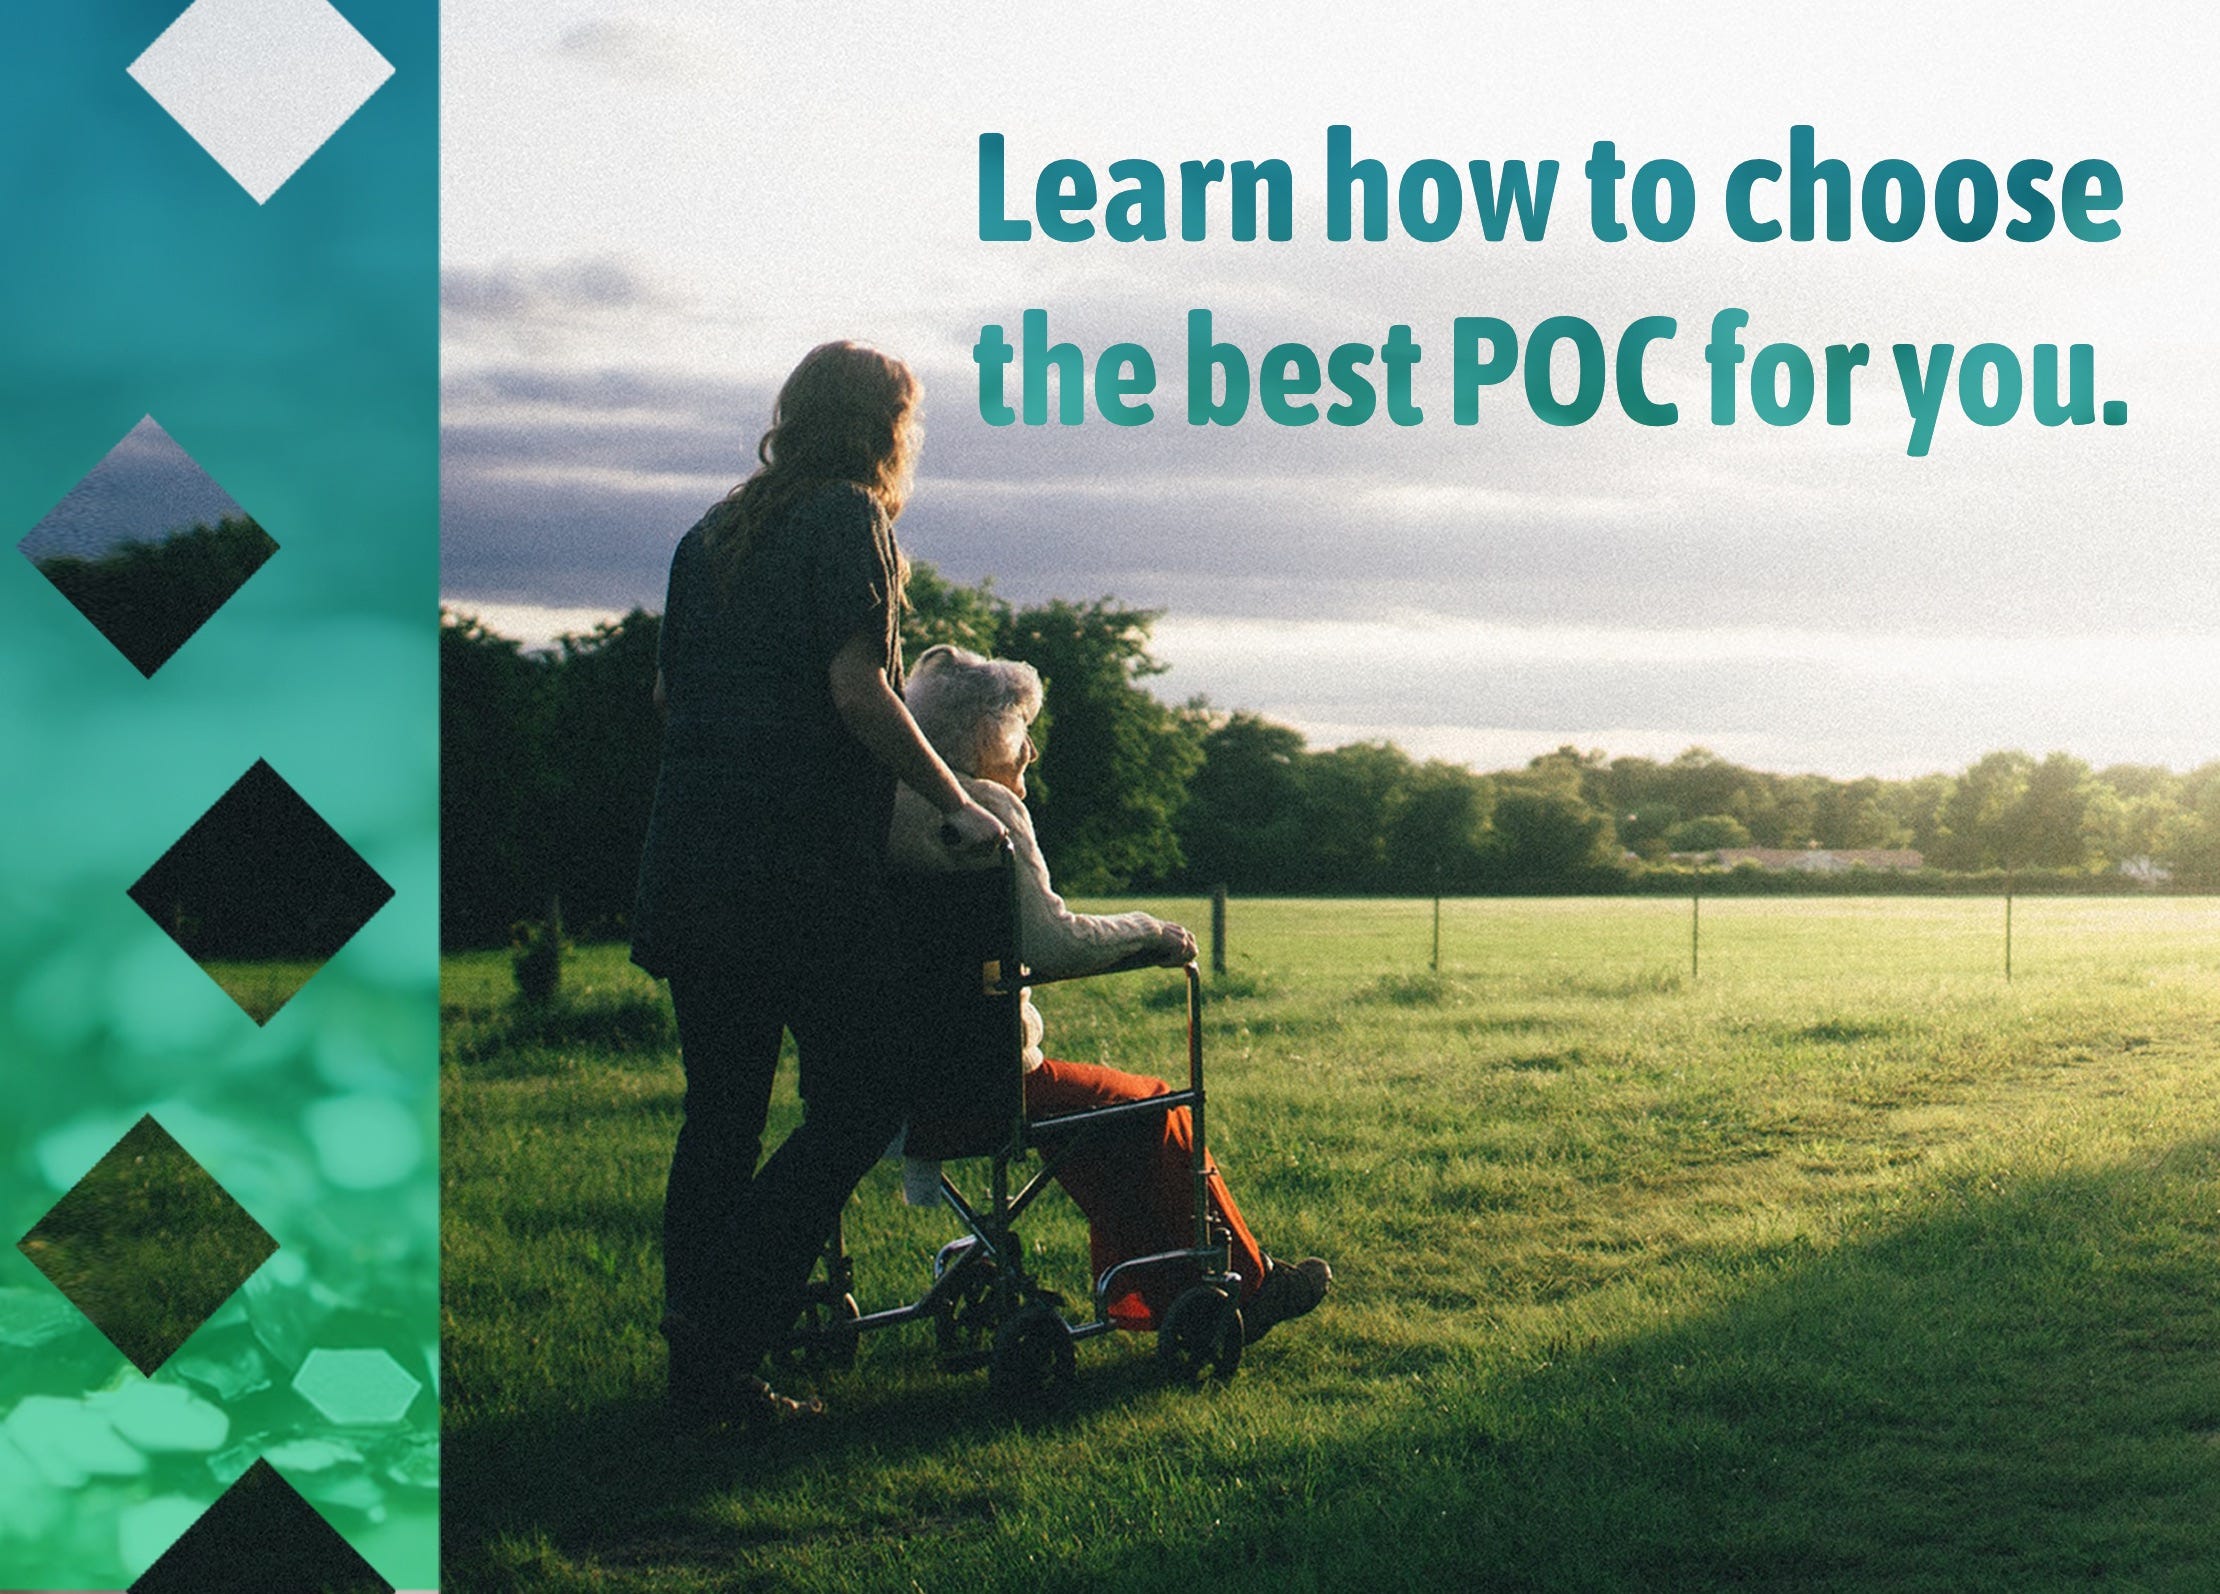 Choose the Best POC for Your Daily Lifestyle